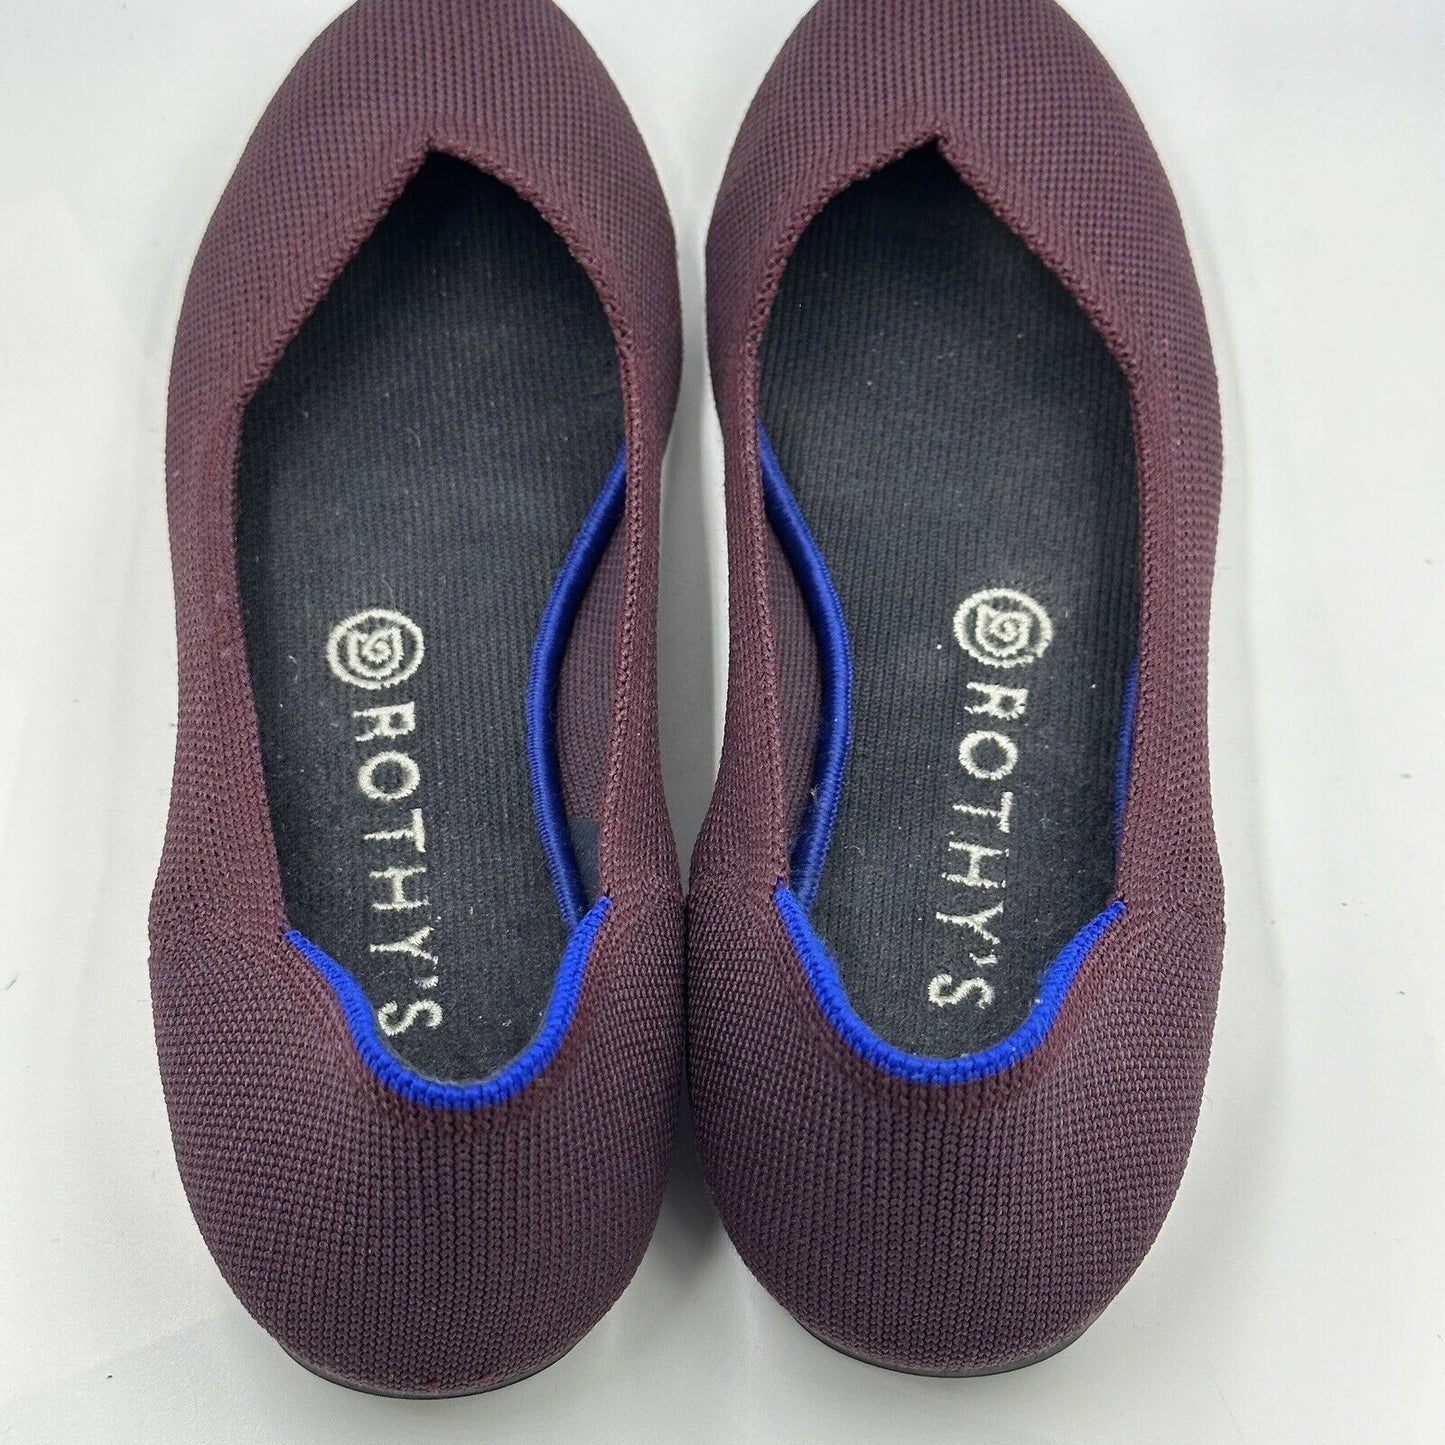 Rothy’s Women Shoes Size 8.5 Discontinued Color Wine Purple Ballet Soft Flats